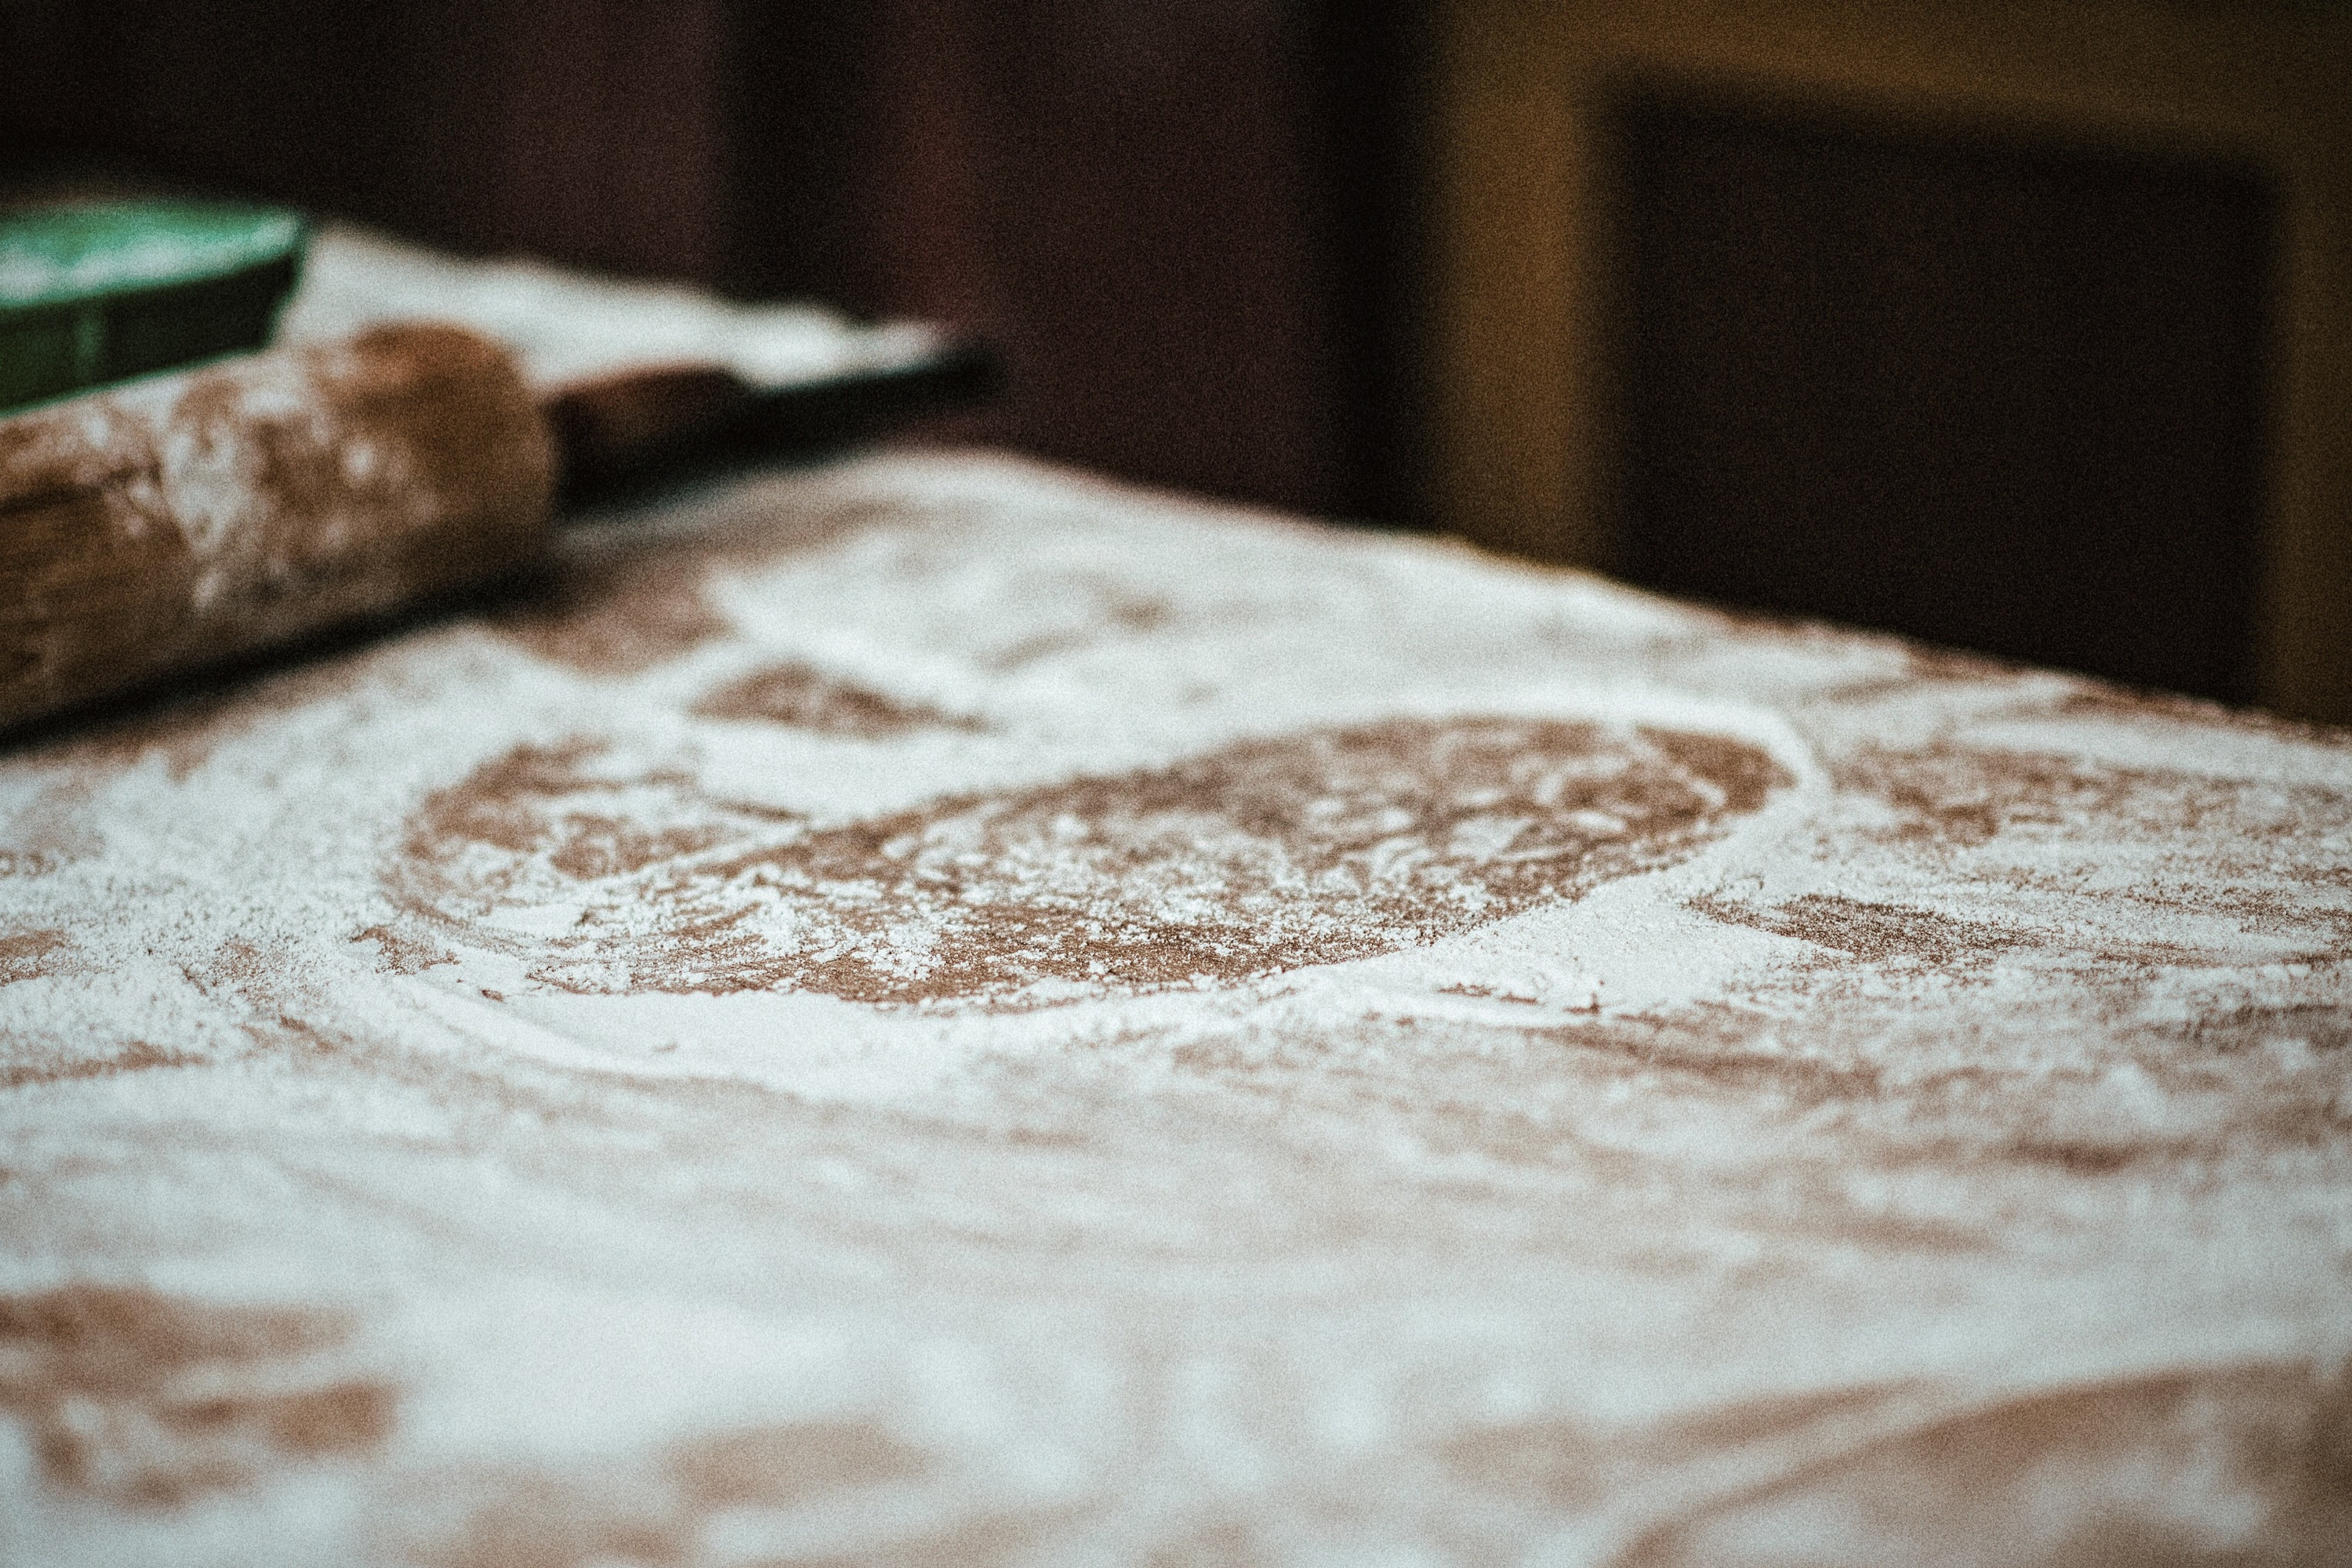 Close-up of flour covering a kitchen table